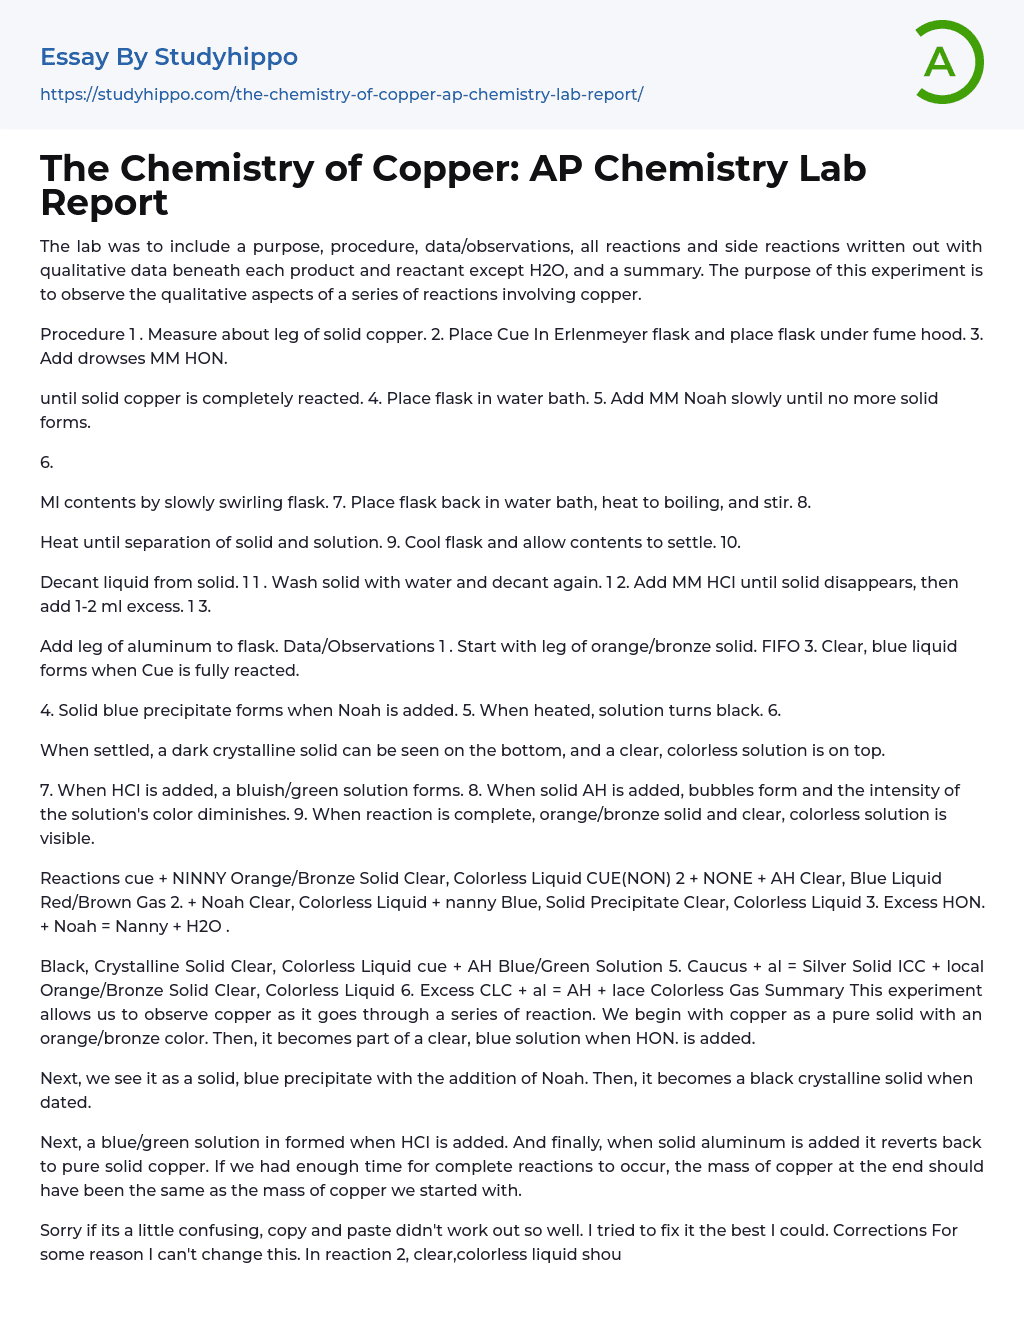 The Chemistry of Copper: AP Chemistry Lab Report Essay Example